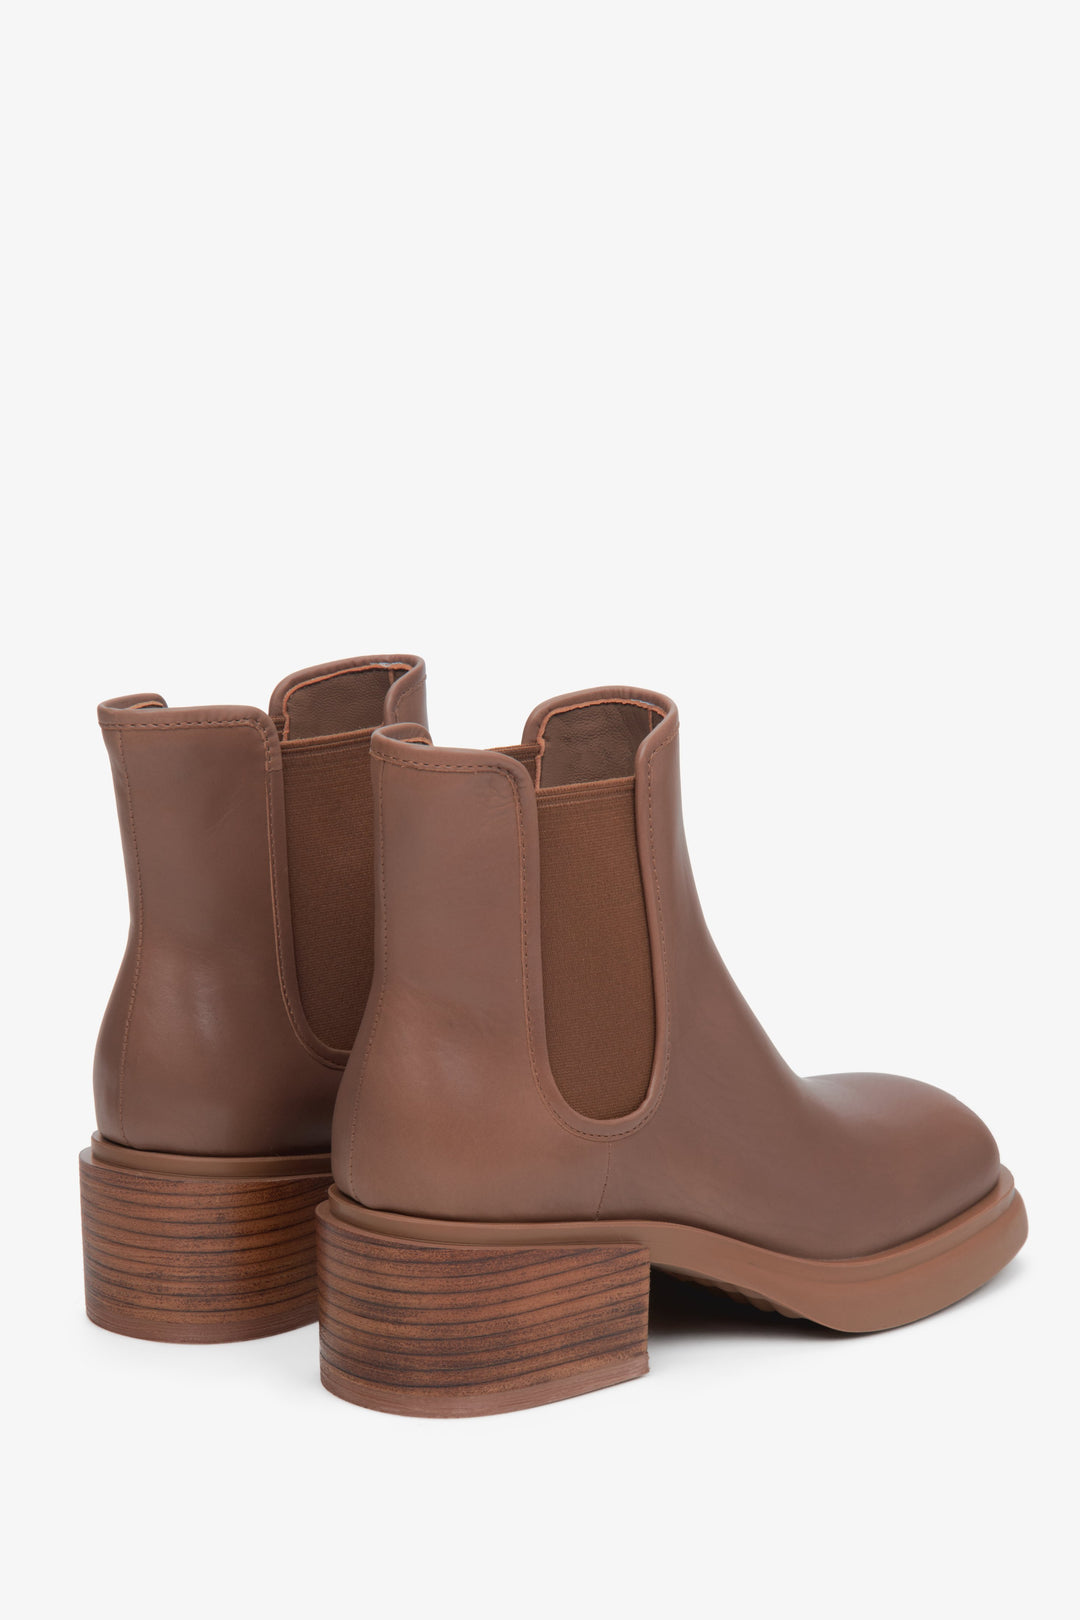 Women's brown leather ankle boots Estro - a cose-up on a heel counter.